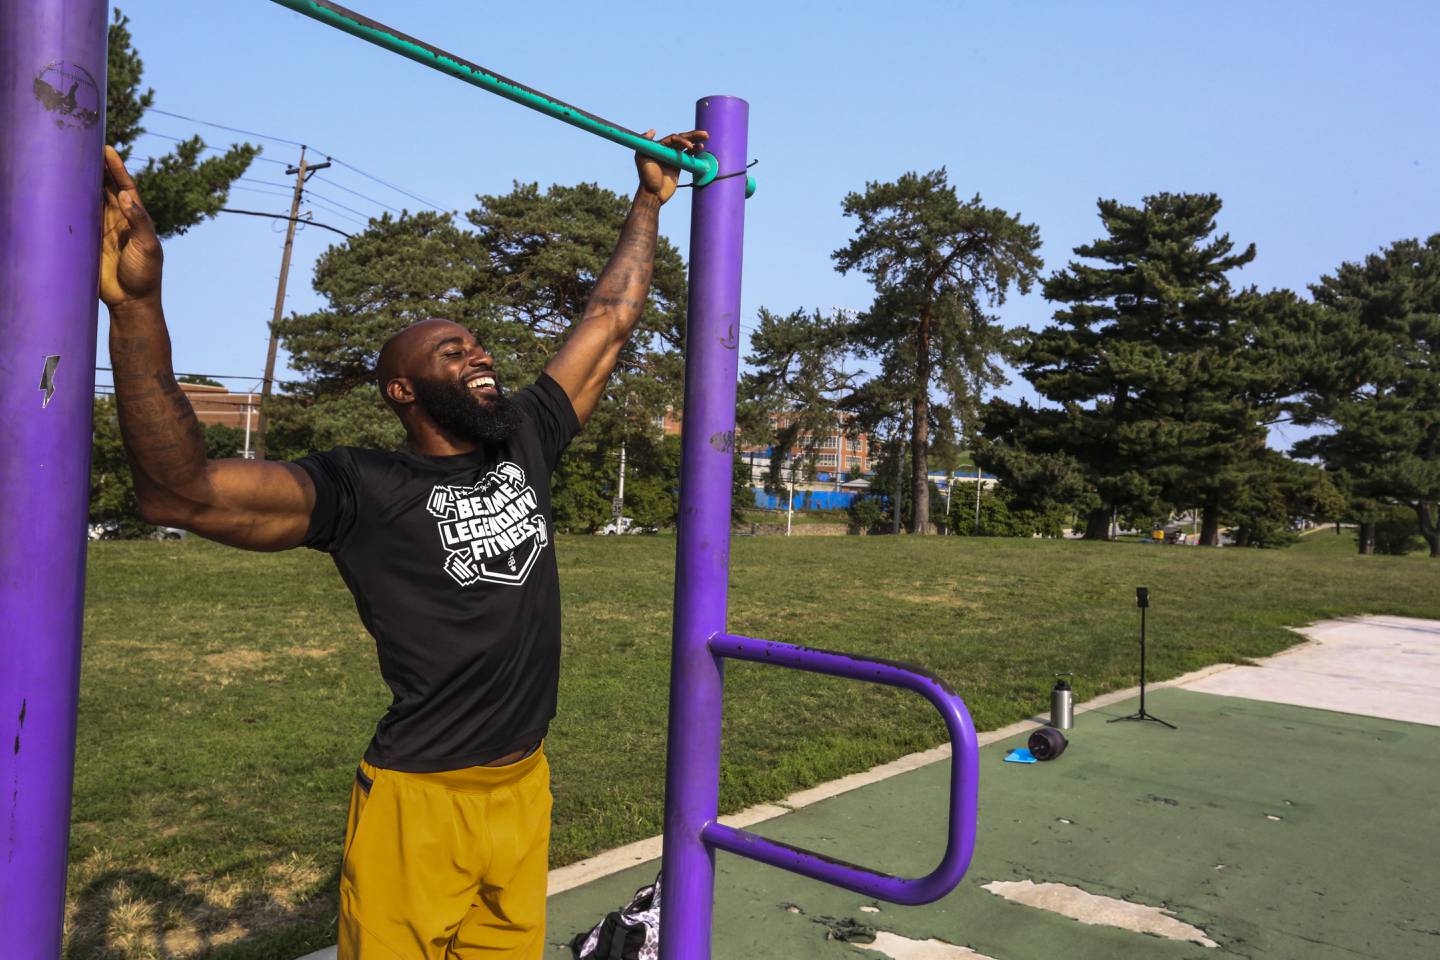 Marcus Hatten, a former basketball player, has been coaching workout classes in the park at Lake Montebello that have attracted a large and dedicted following.